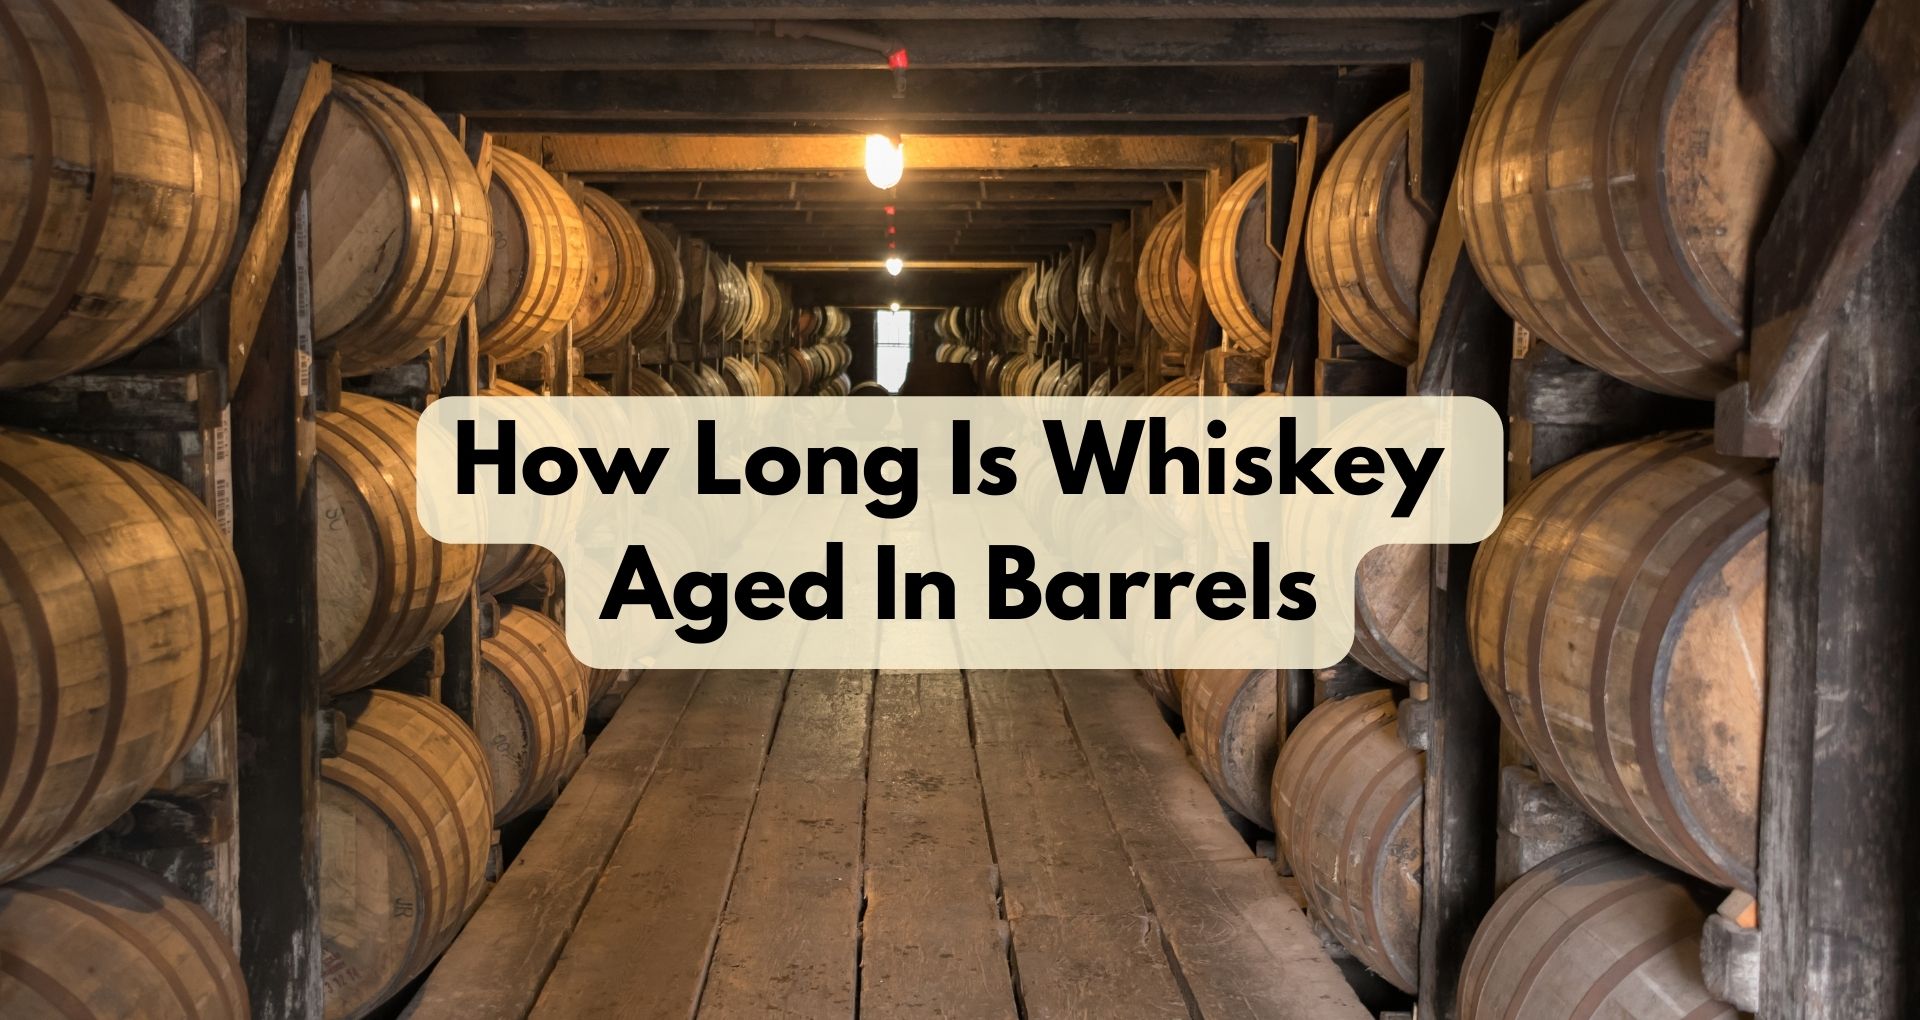 How Long Is Whiskey Aged In Barrels